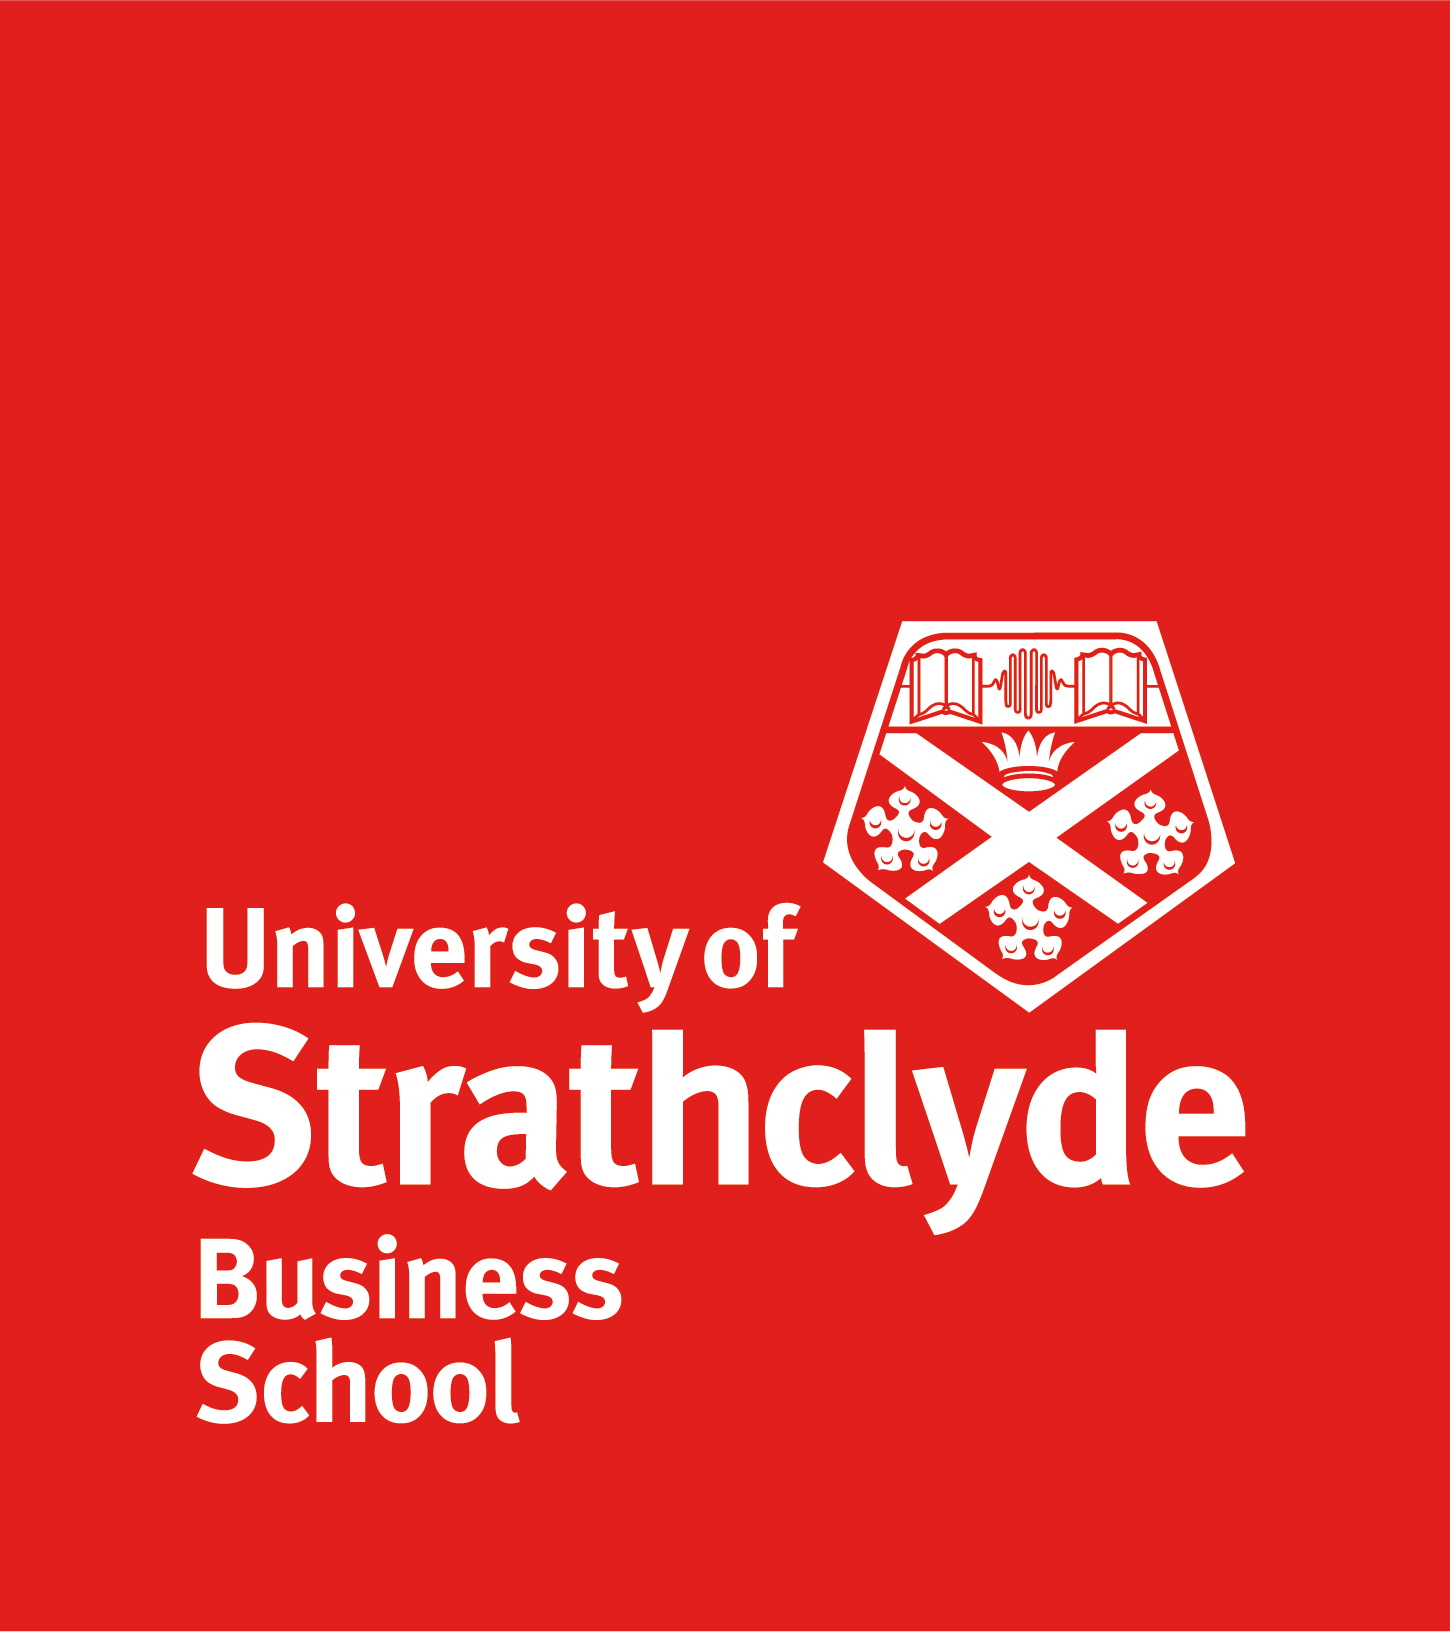 red background with white university logo and university of strathclyde business school written in white text